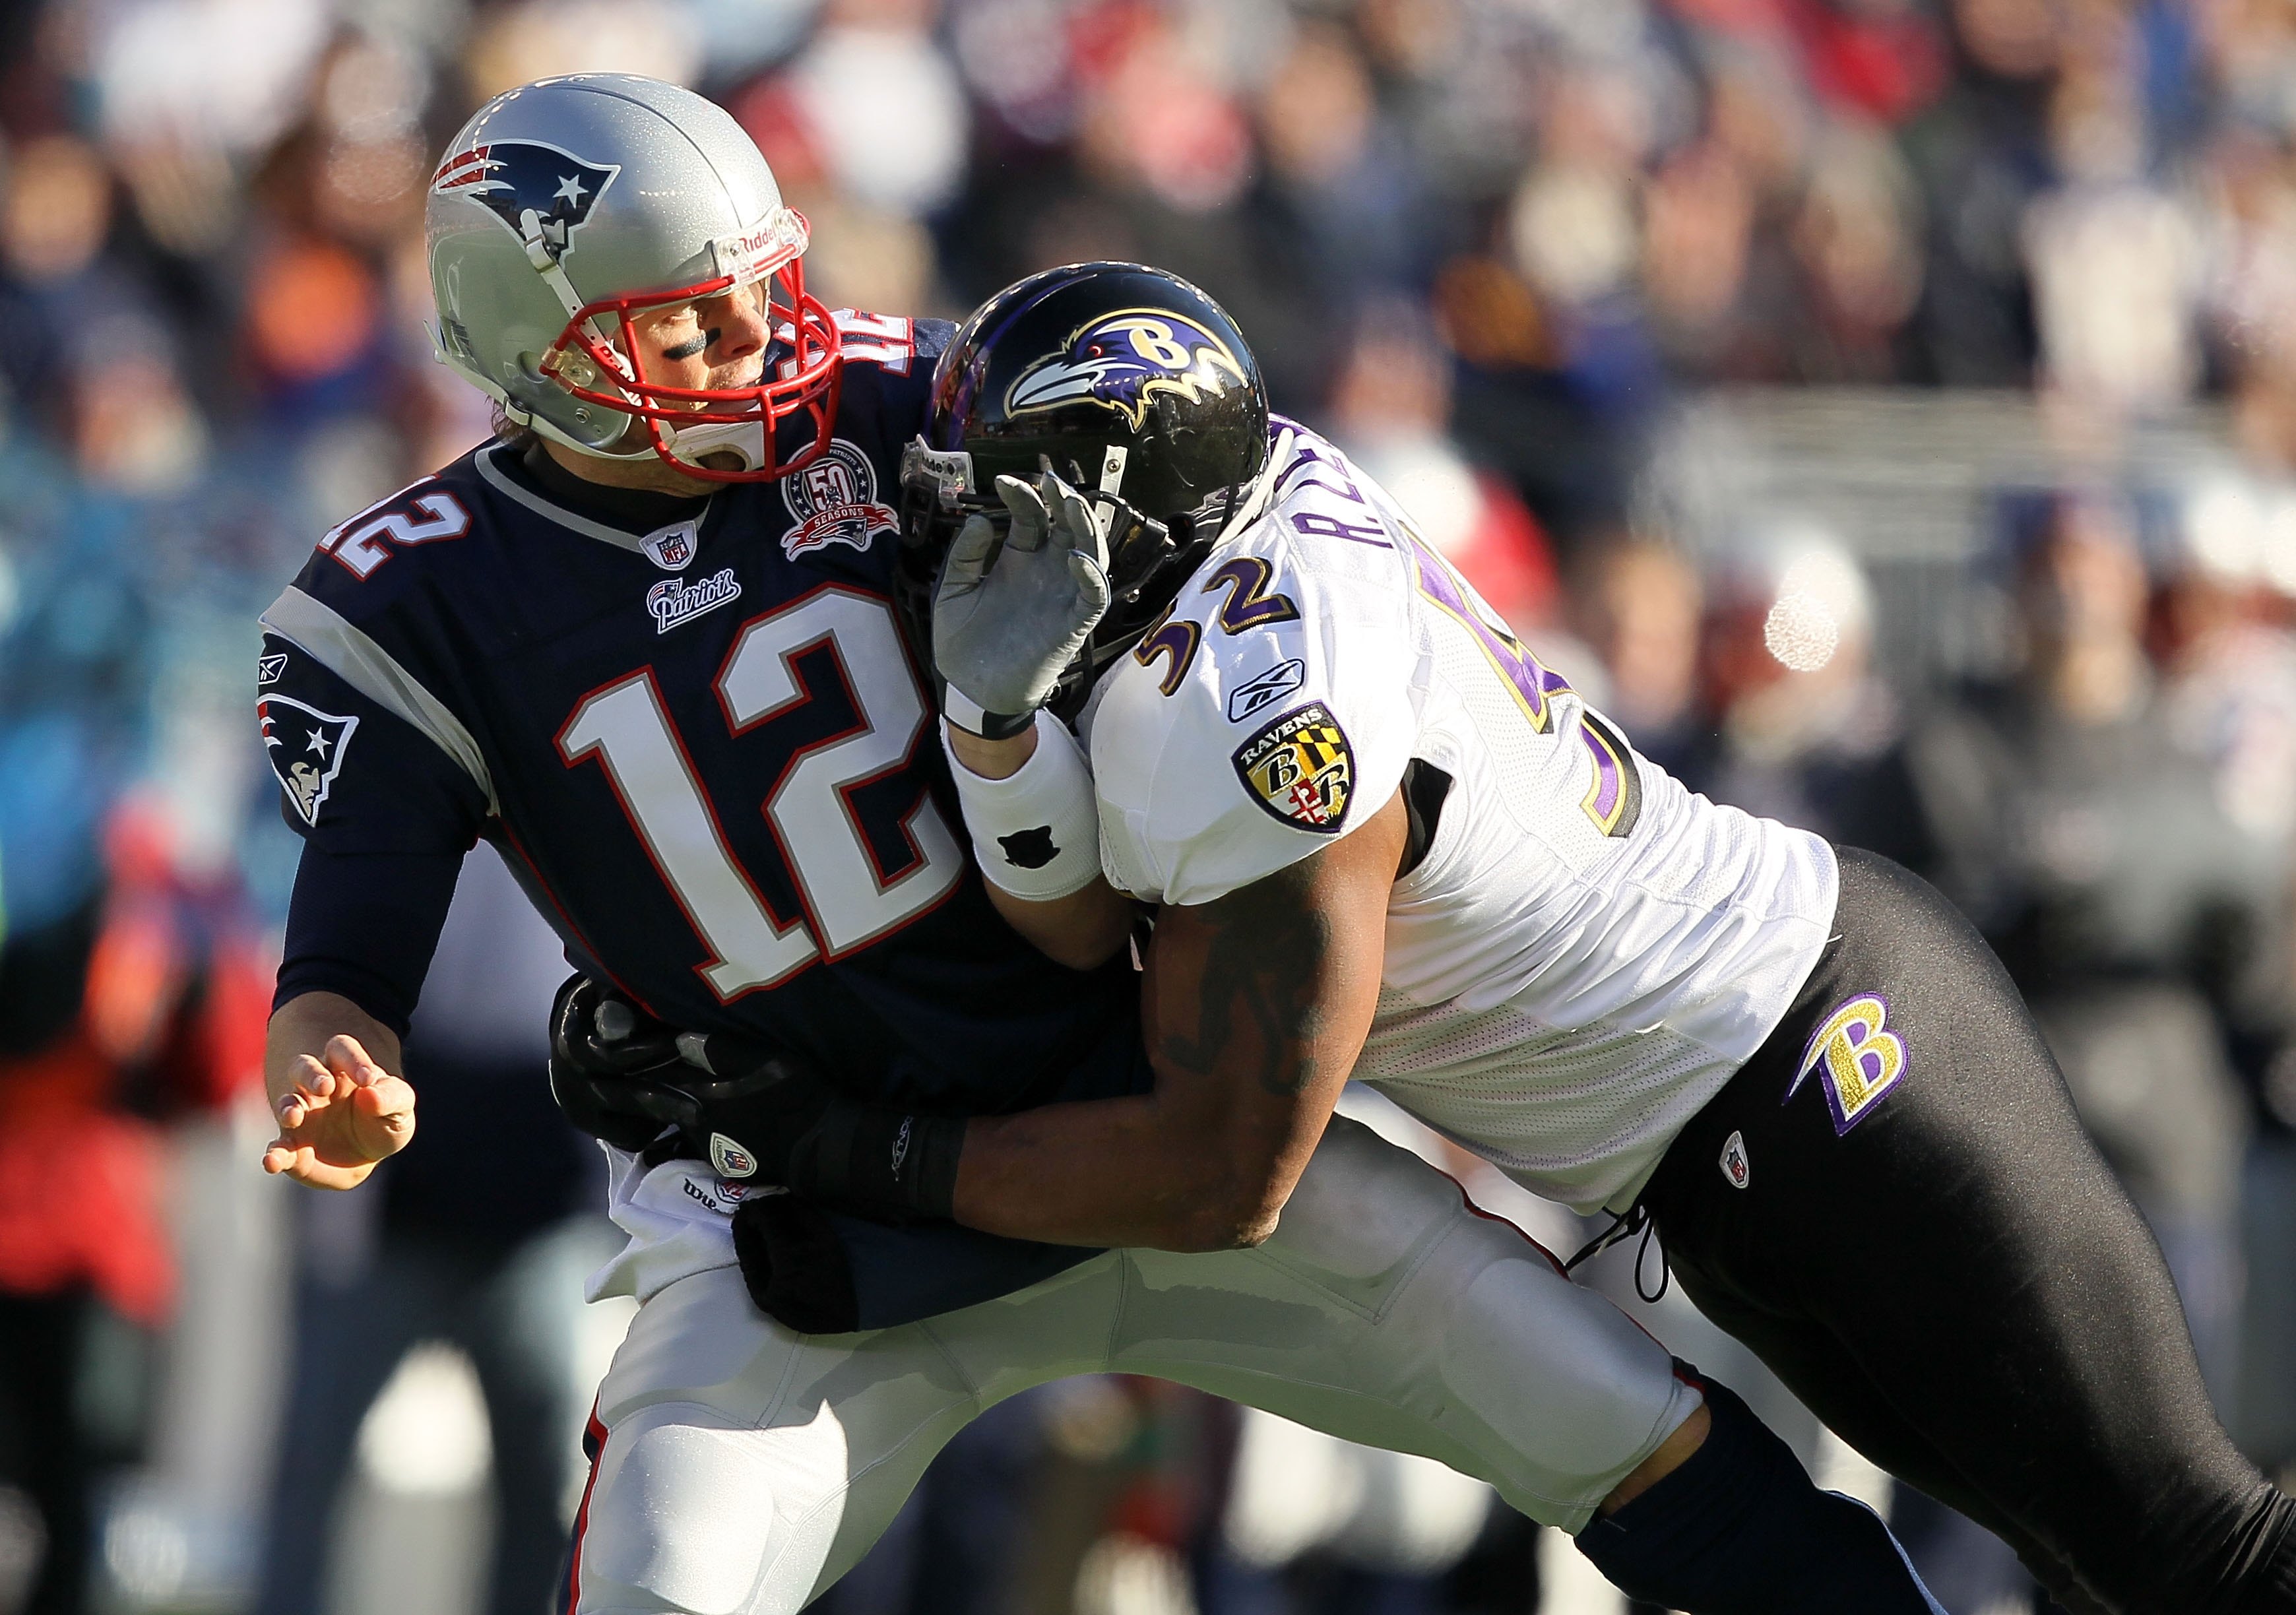 FOXBORO, MA - JANUARY 10:  Quarterback Tom Brady #12 of the New England Patriots is hit by Ray Lewis #52 of the Baltimore Ravens during the 2010 AFC wild-card playoff game at Gillette Stadium on January 10, 2010 in Foxboro, Massachusetts. The Ravens won 3